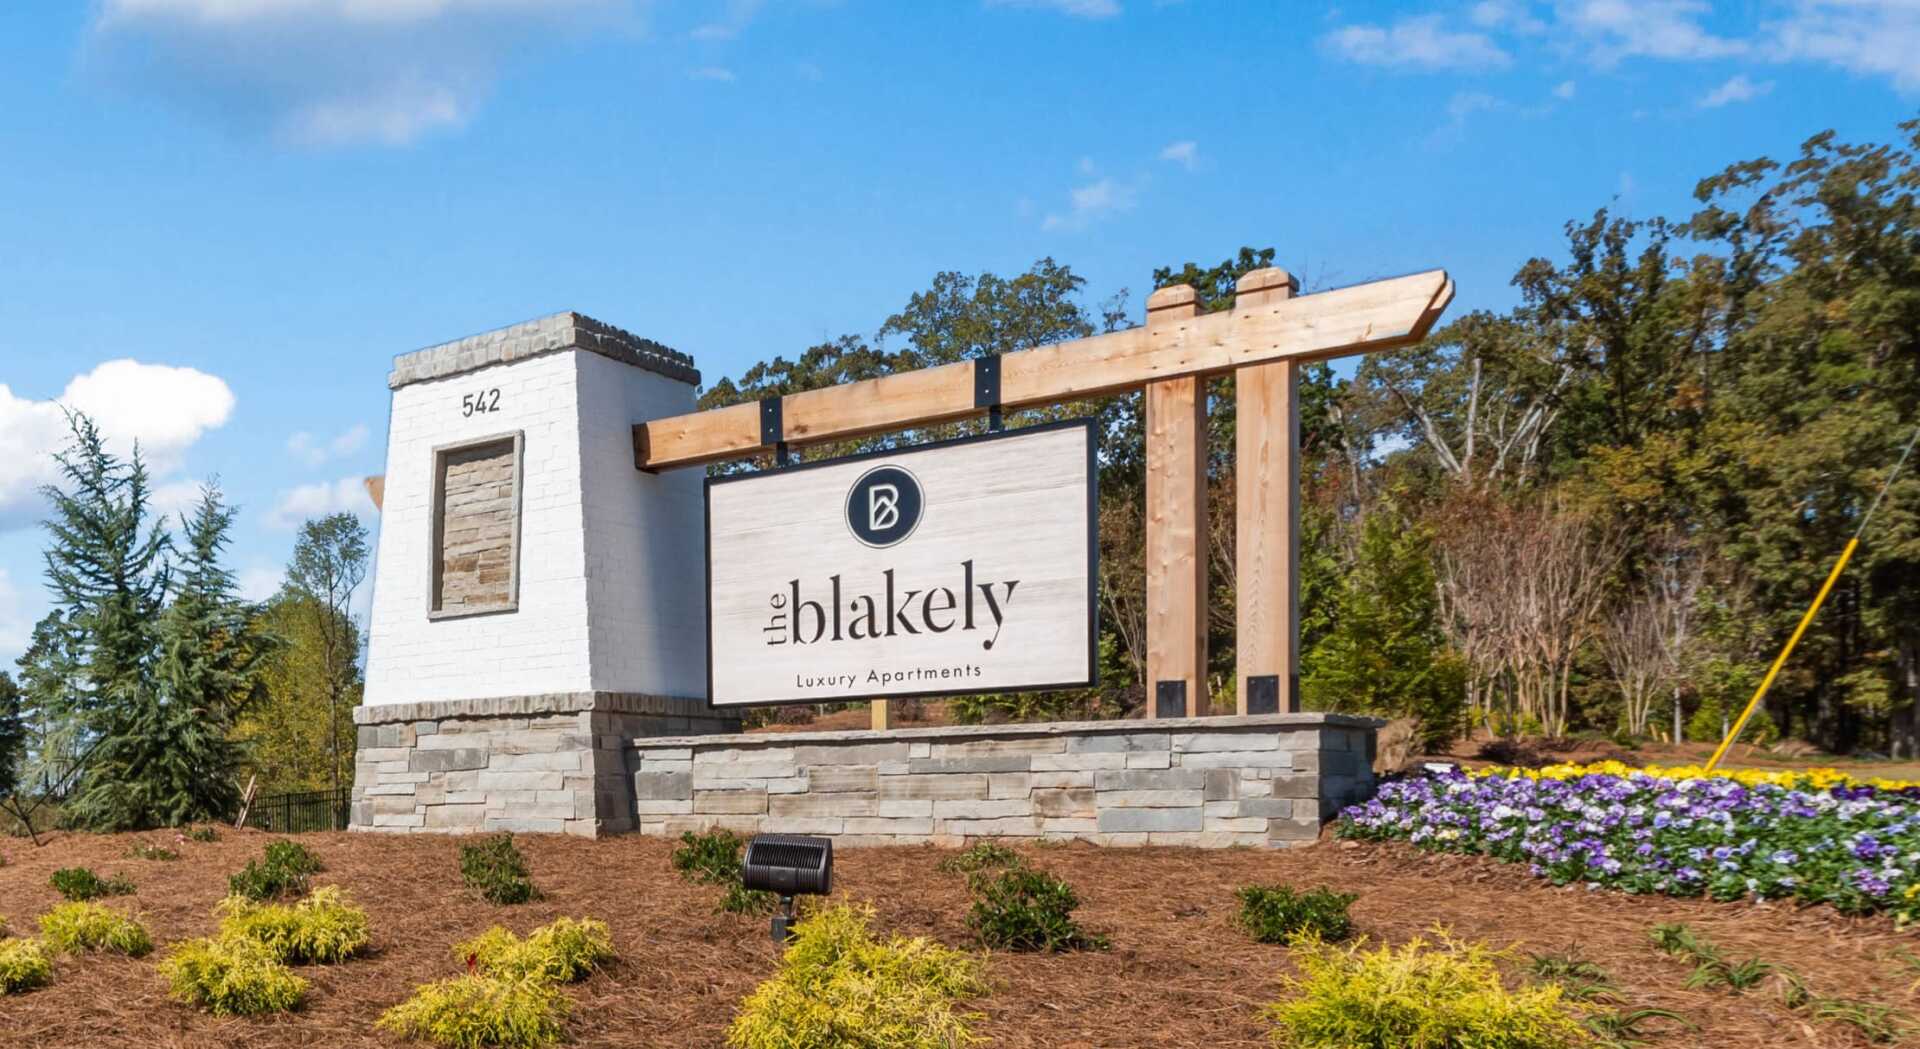 The Blakely apartment community sign.